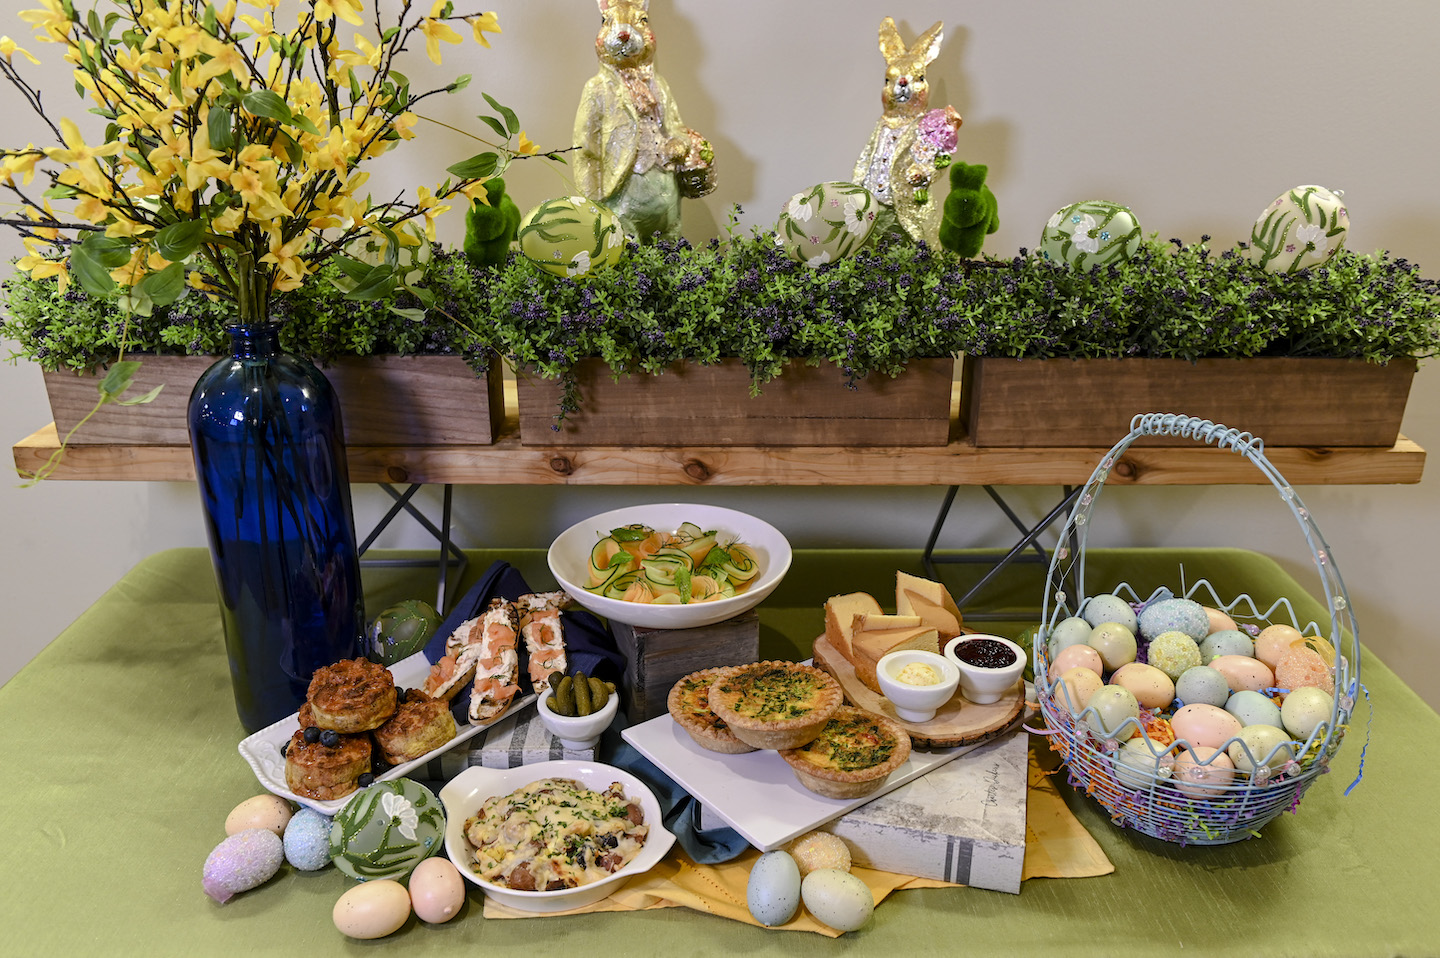 Event Inspiration Blog - Puff 'n Stuff Catering & Events